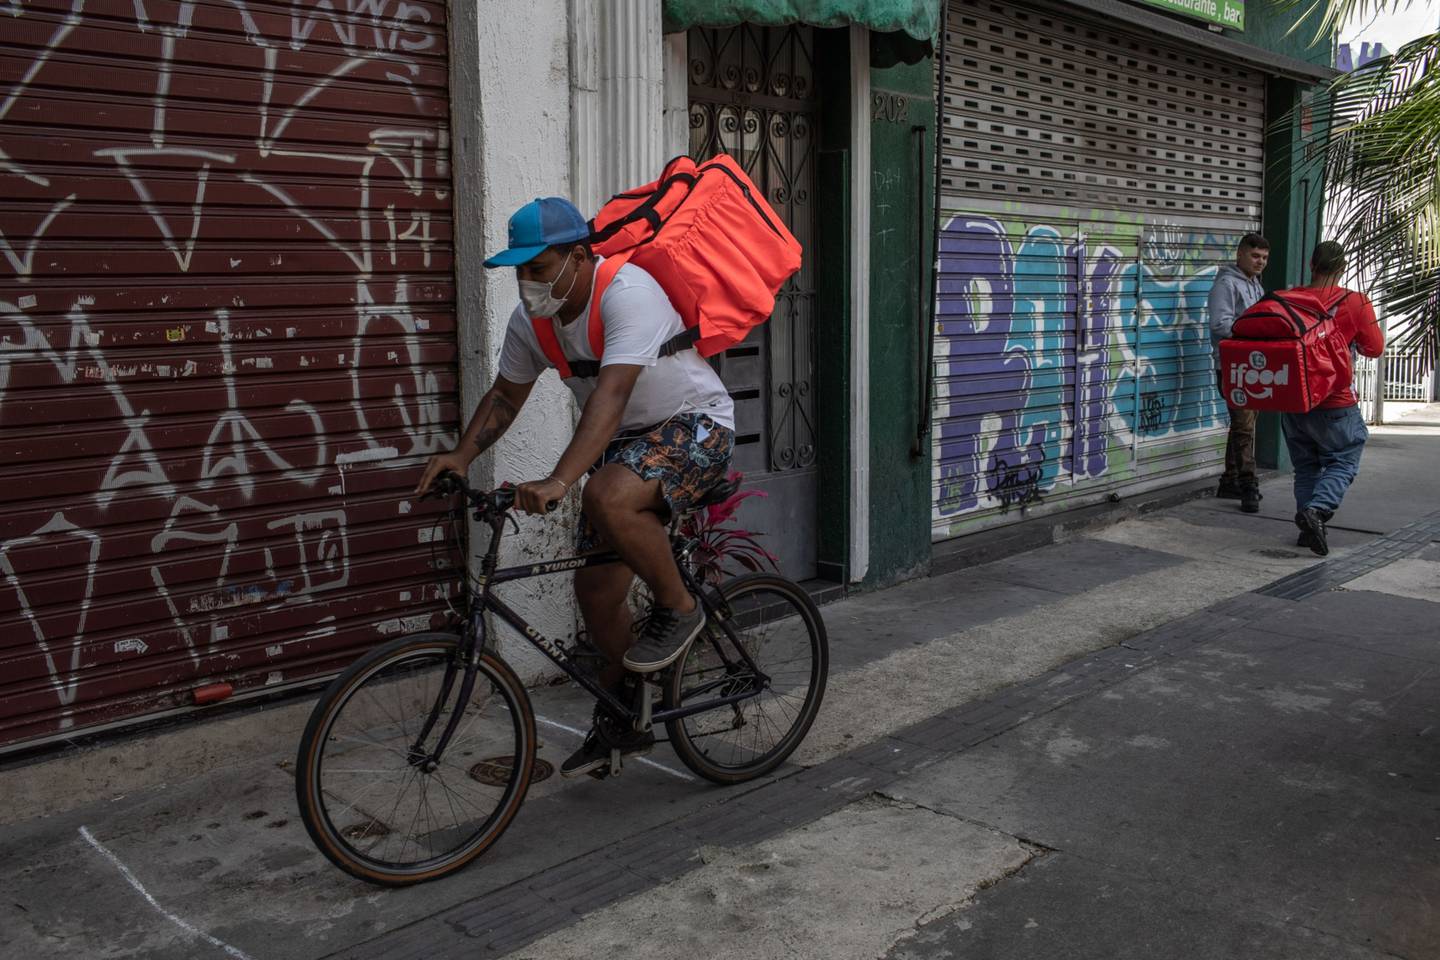 Gig Economy Apps in Brazil Score Low for Decent Working Conditions: Study